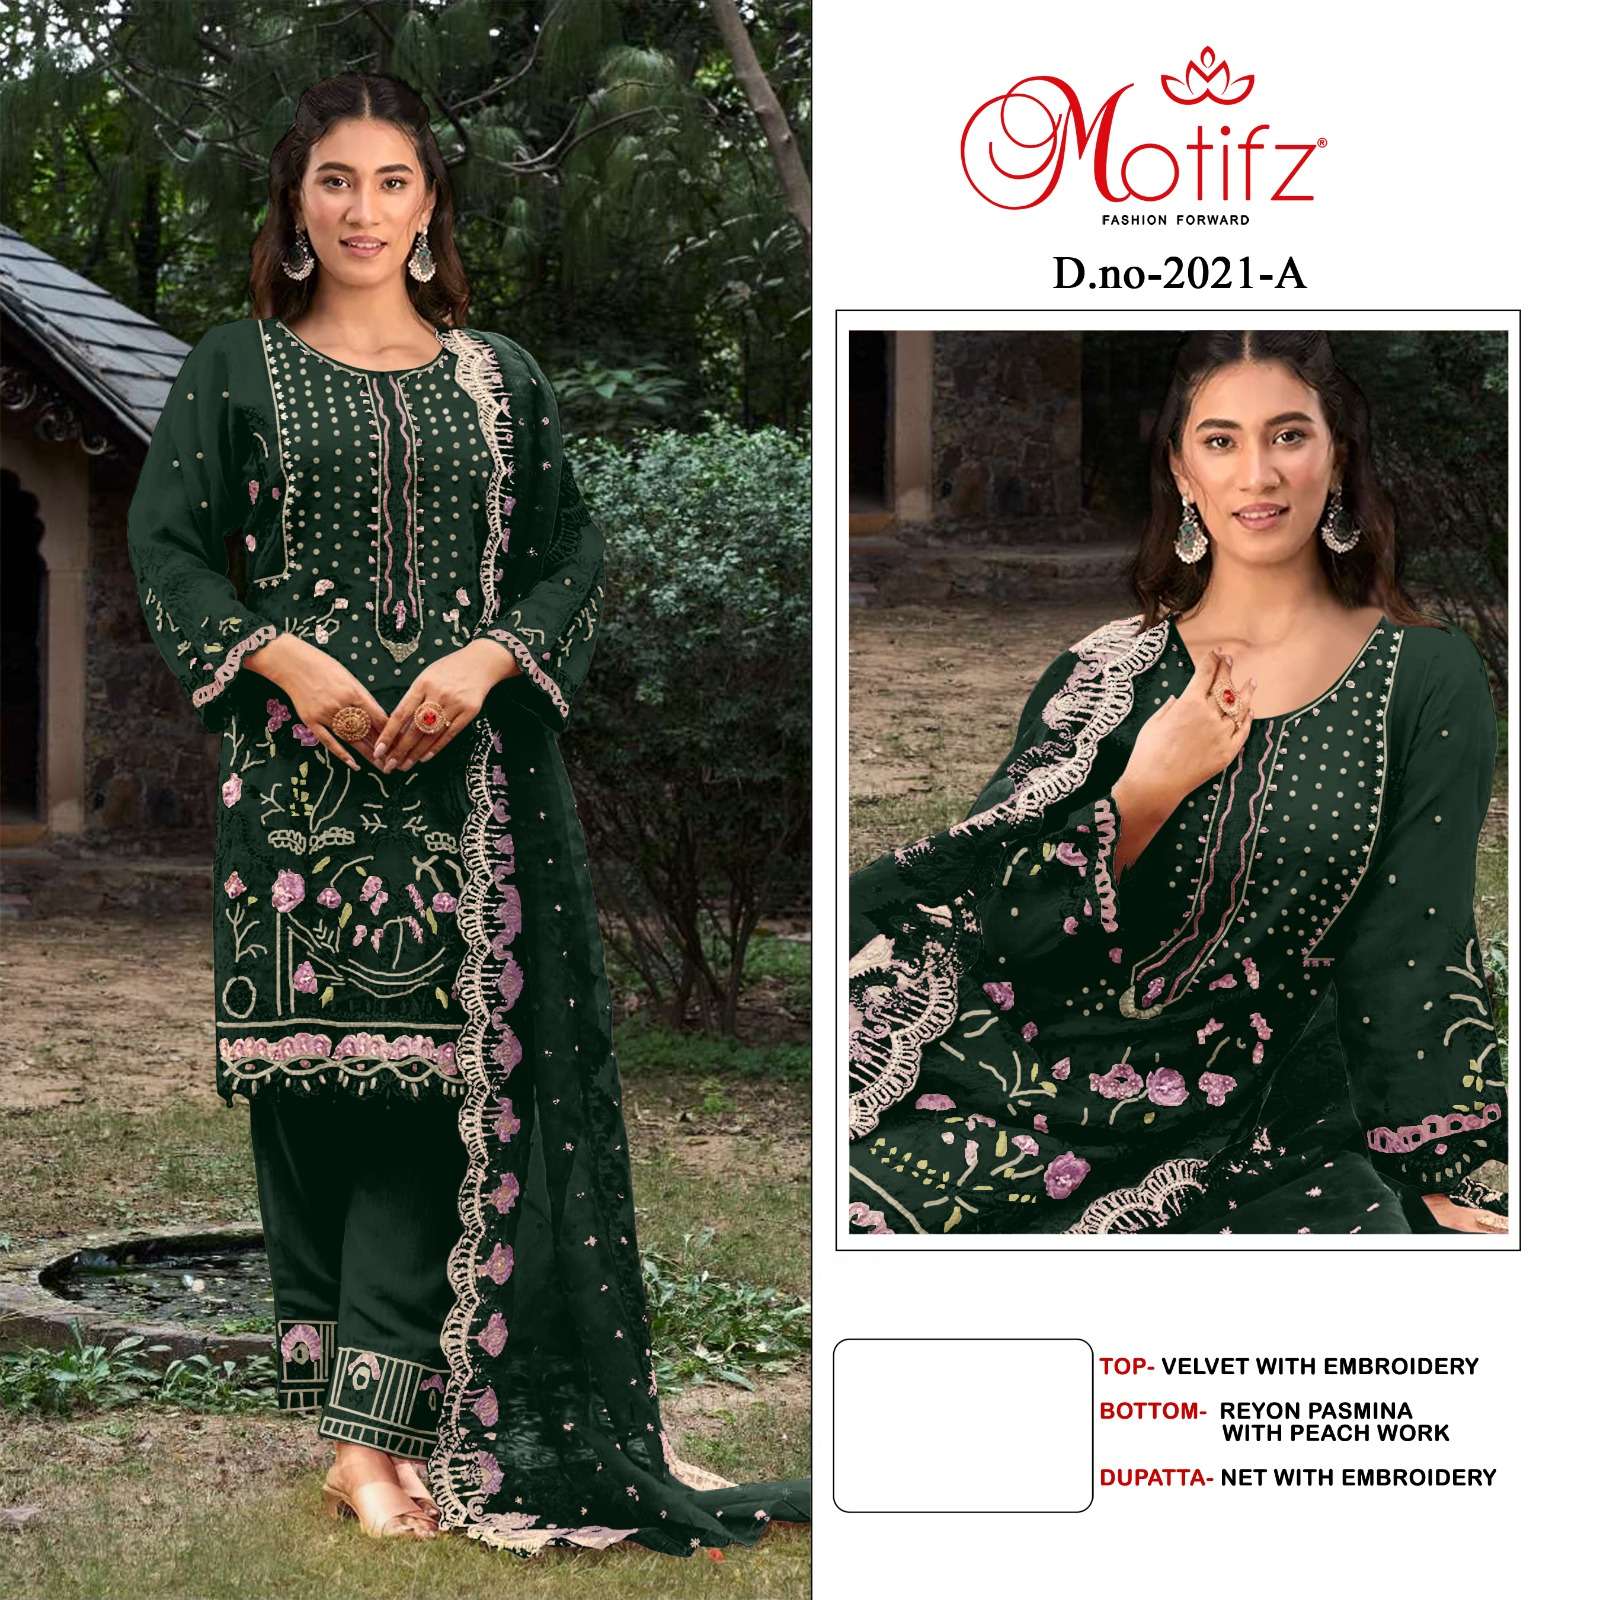 Motifz 2021 Velvet with embroidery work Green colour rich lo...